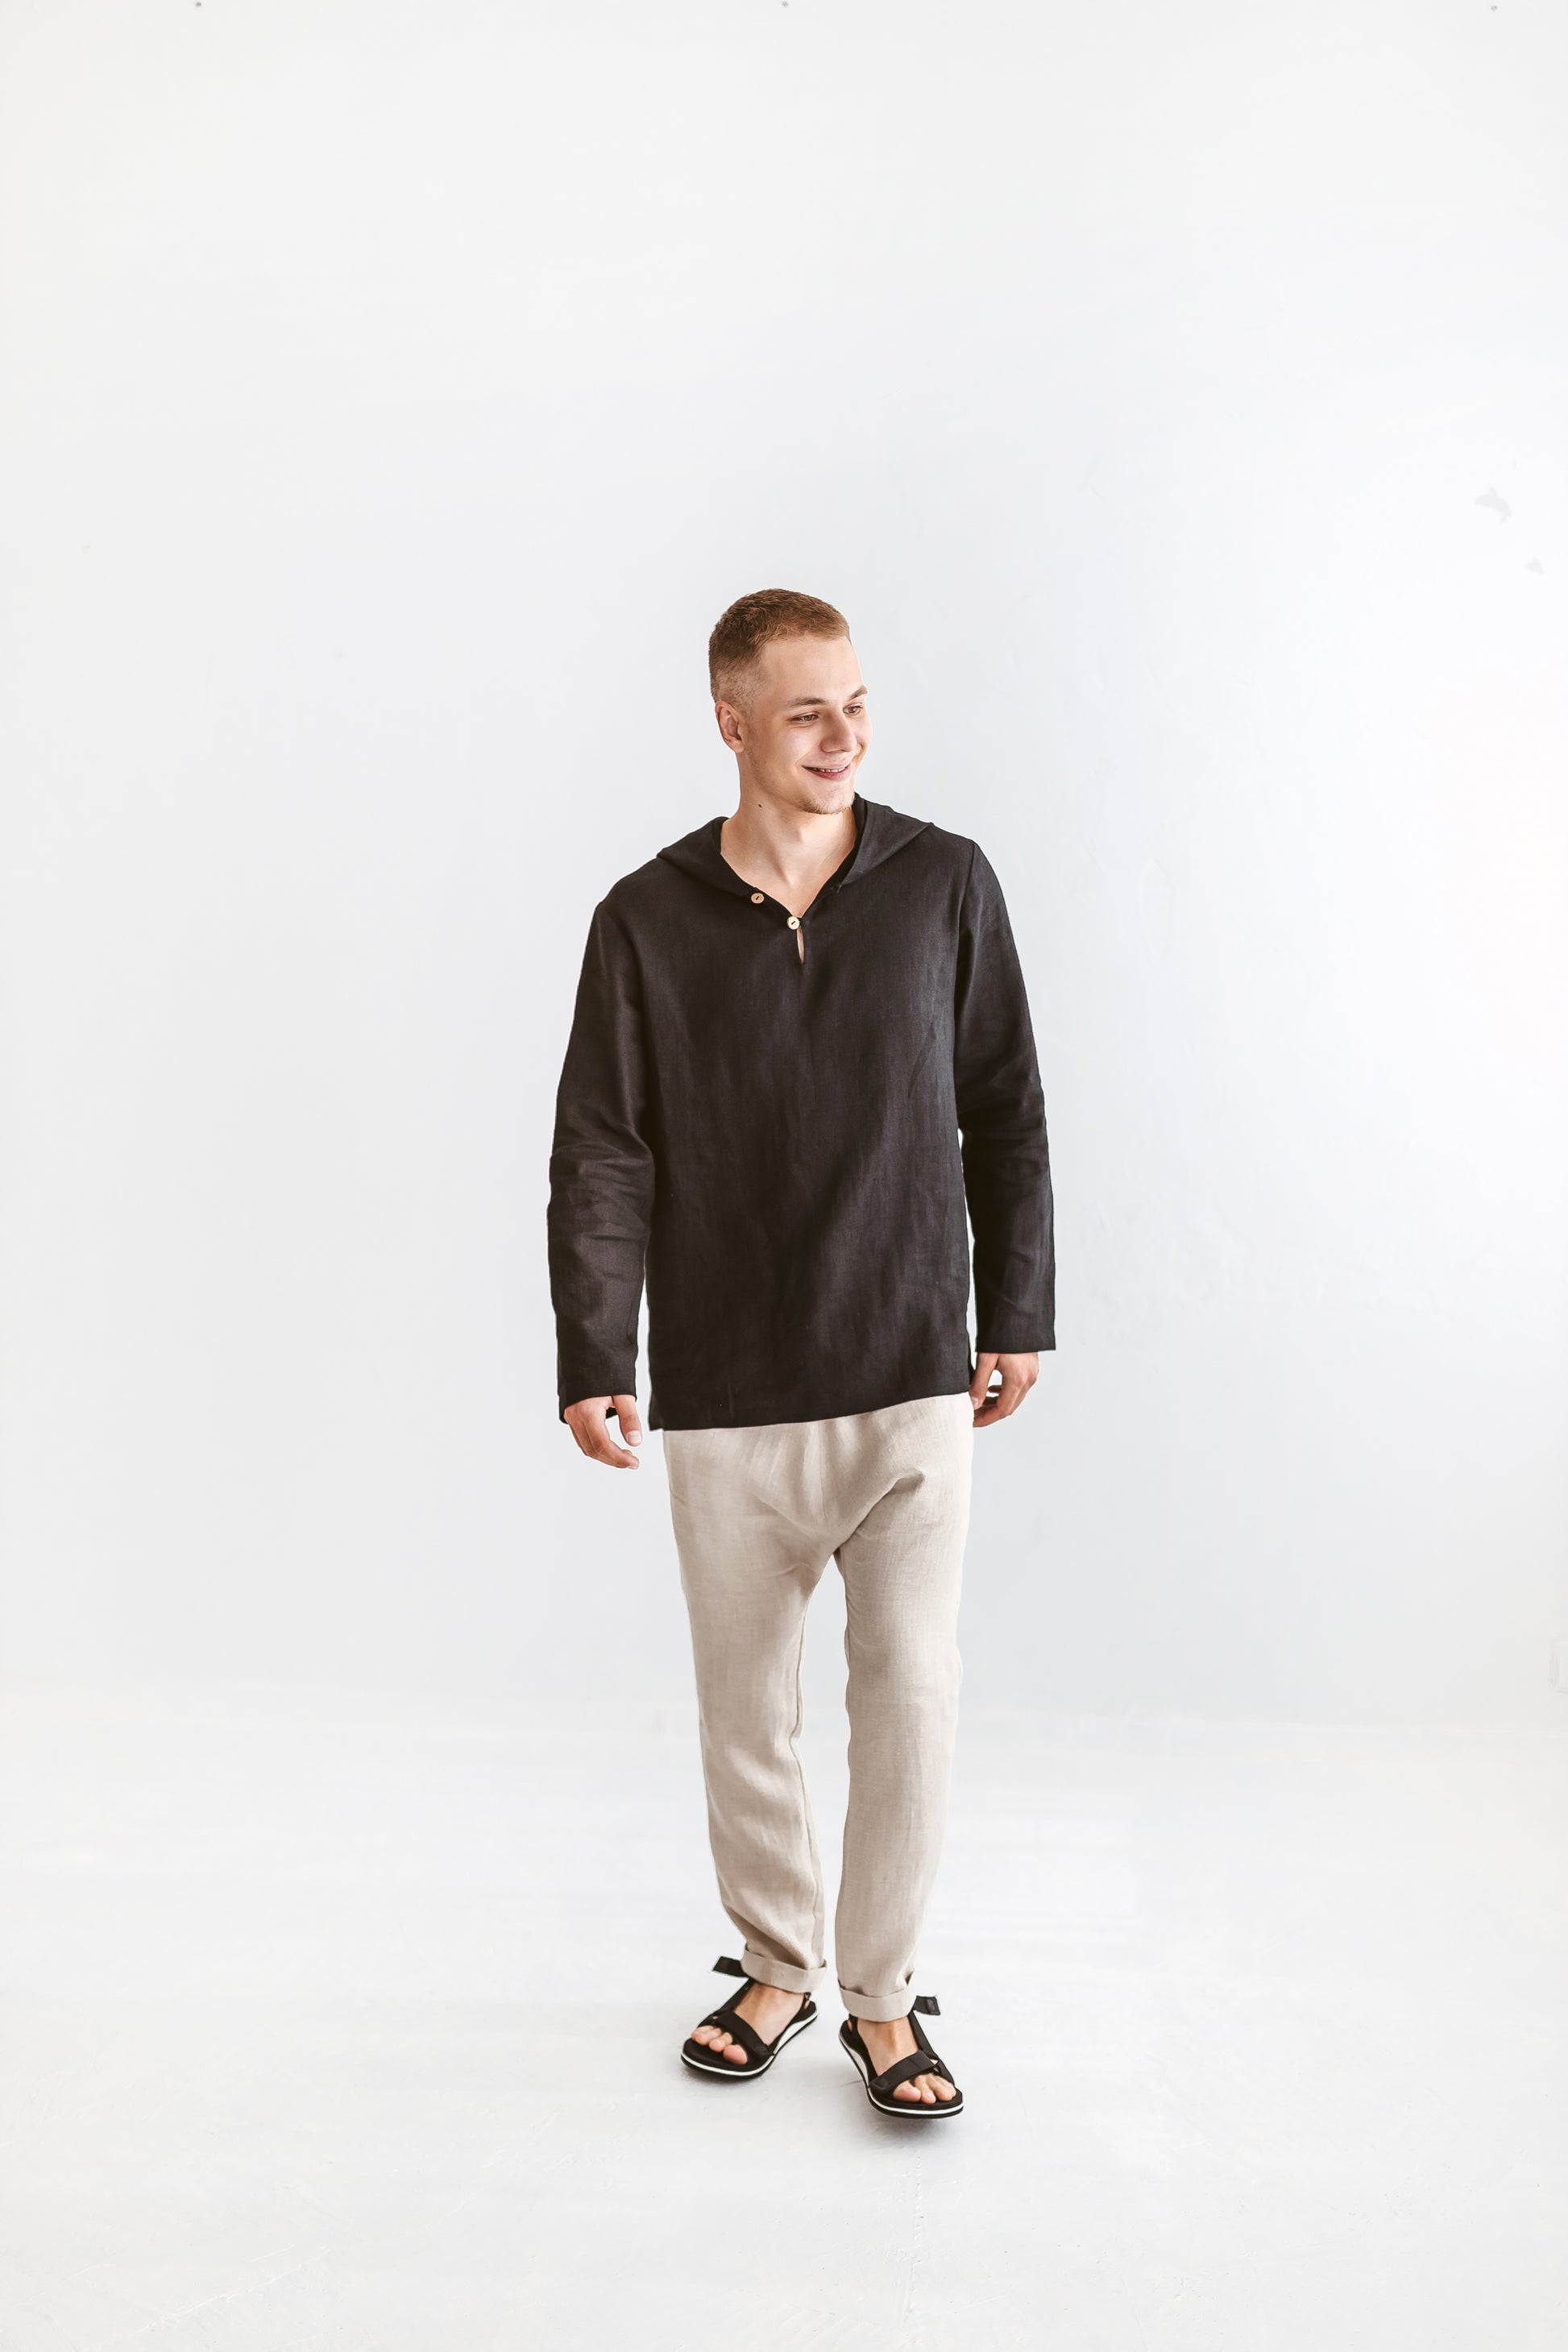 Undyed Natural Linen Unisex Harem Pants / Trousers, Relaxed Look